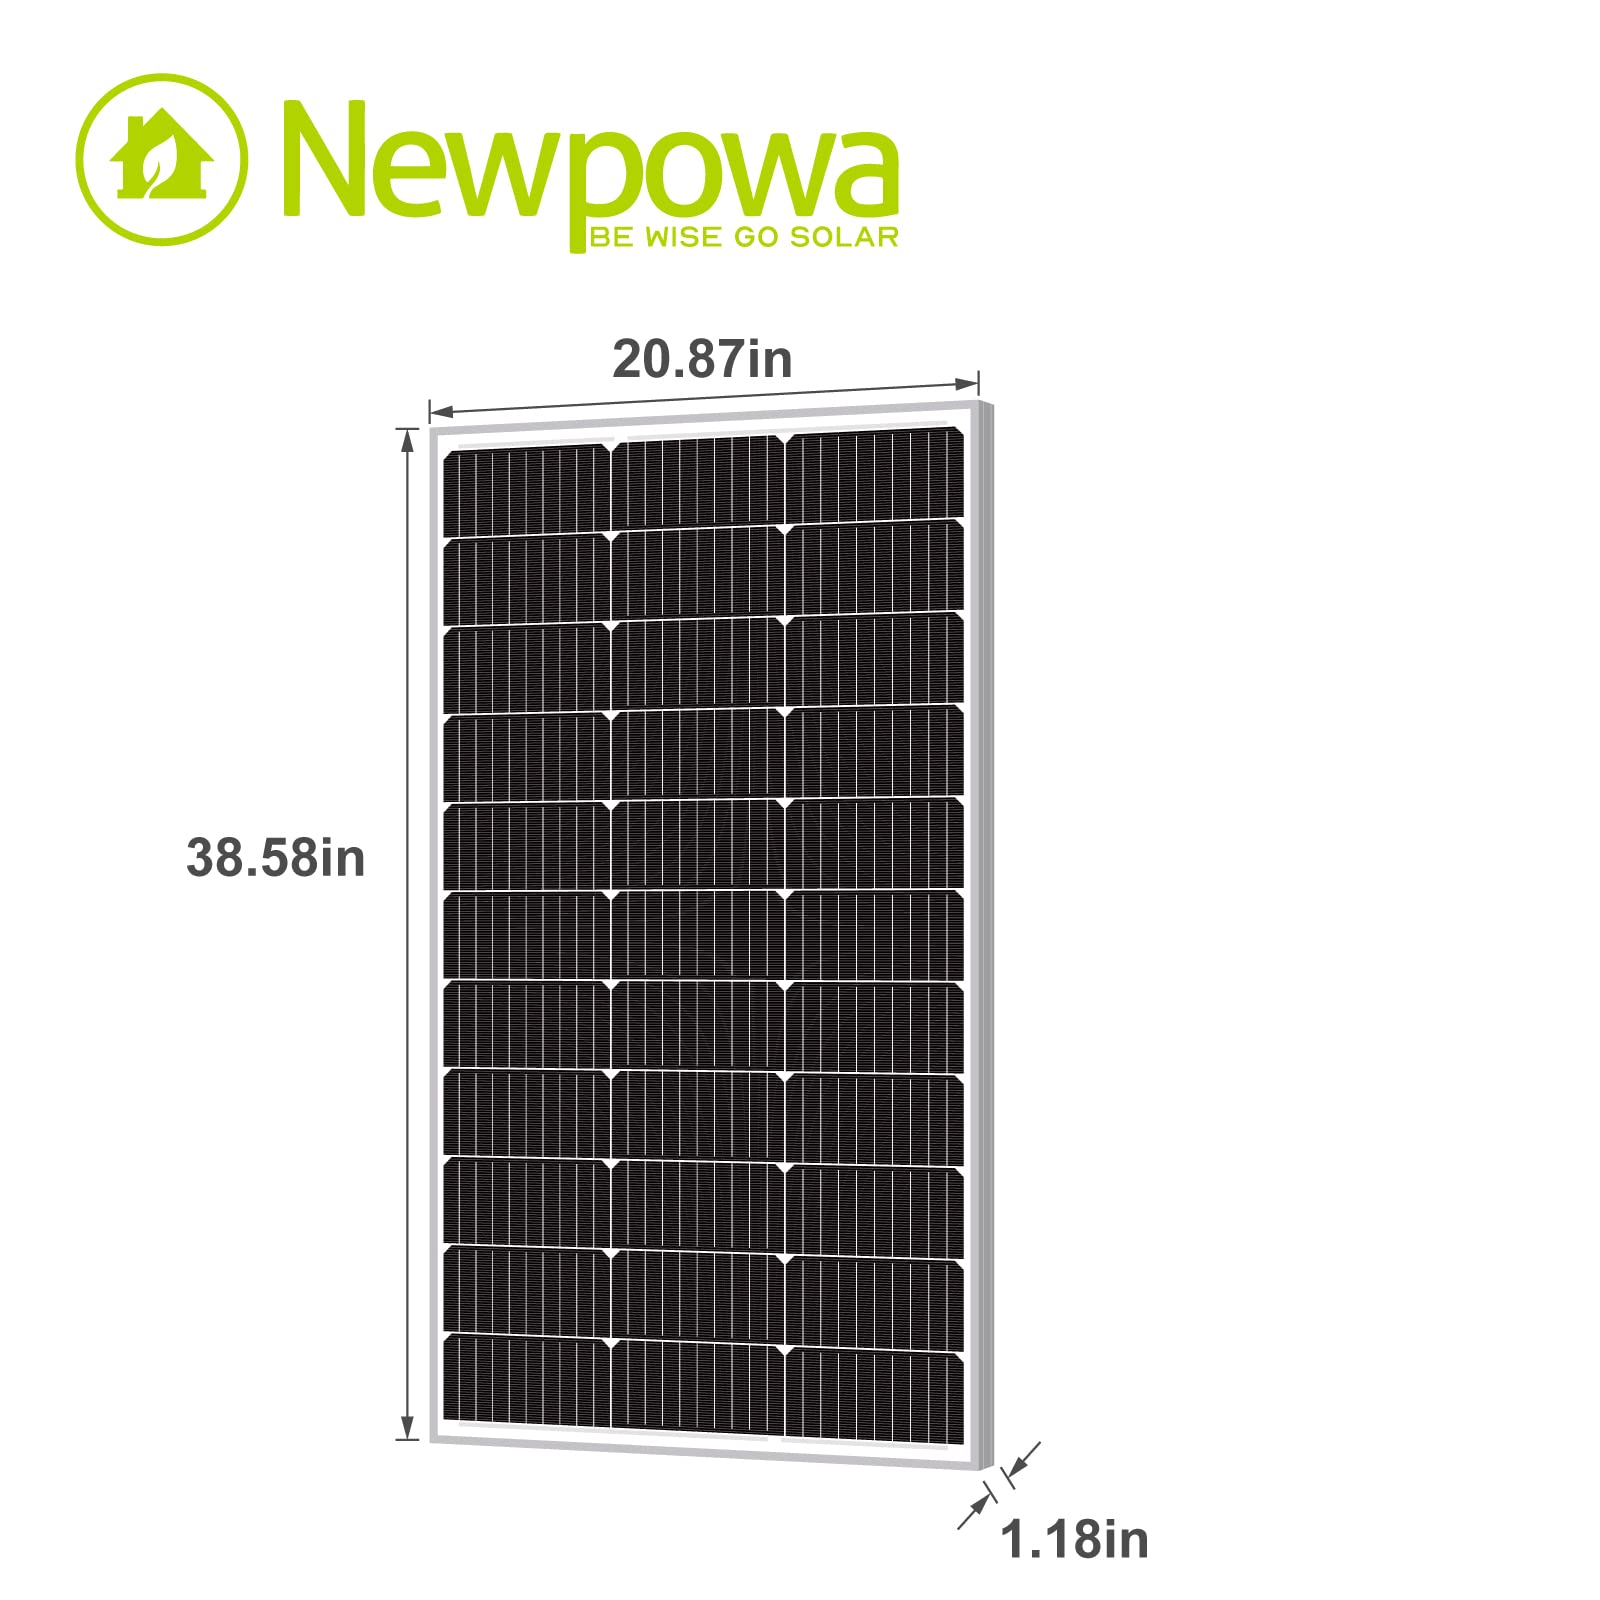 Newpowa 9BB Cell 200 Watt 12V Monocrystalline Solar Panel Kit, 2PCS 100W Solar Charger Kit+12V 100AH LiFePO4 Battery+20A Charge Controller+Mounting Z Brackets+Cable, Solar Power for Off Grid System